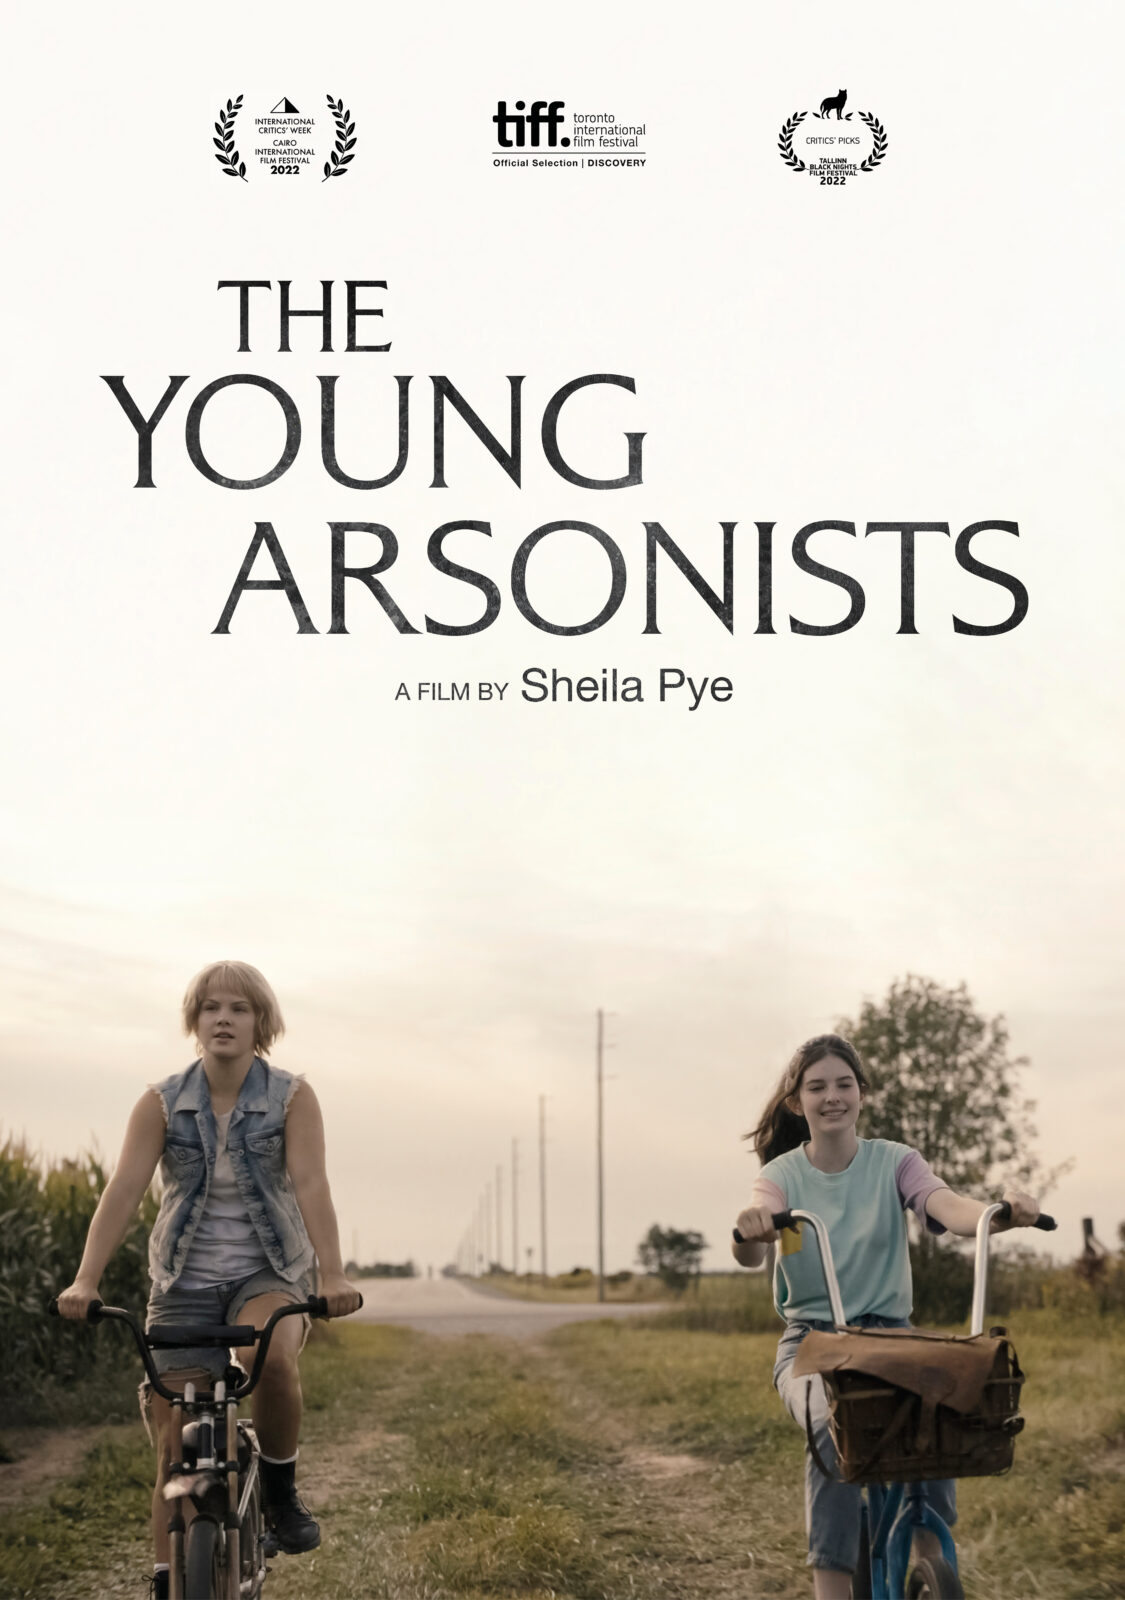 THE YOUNG ARSONISTS